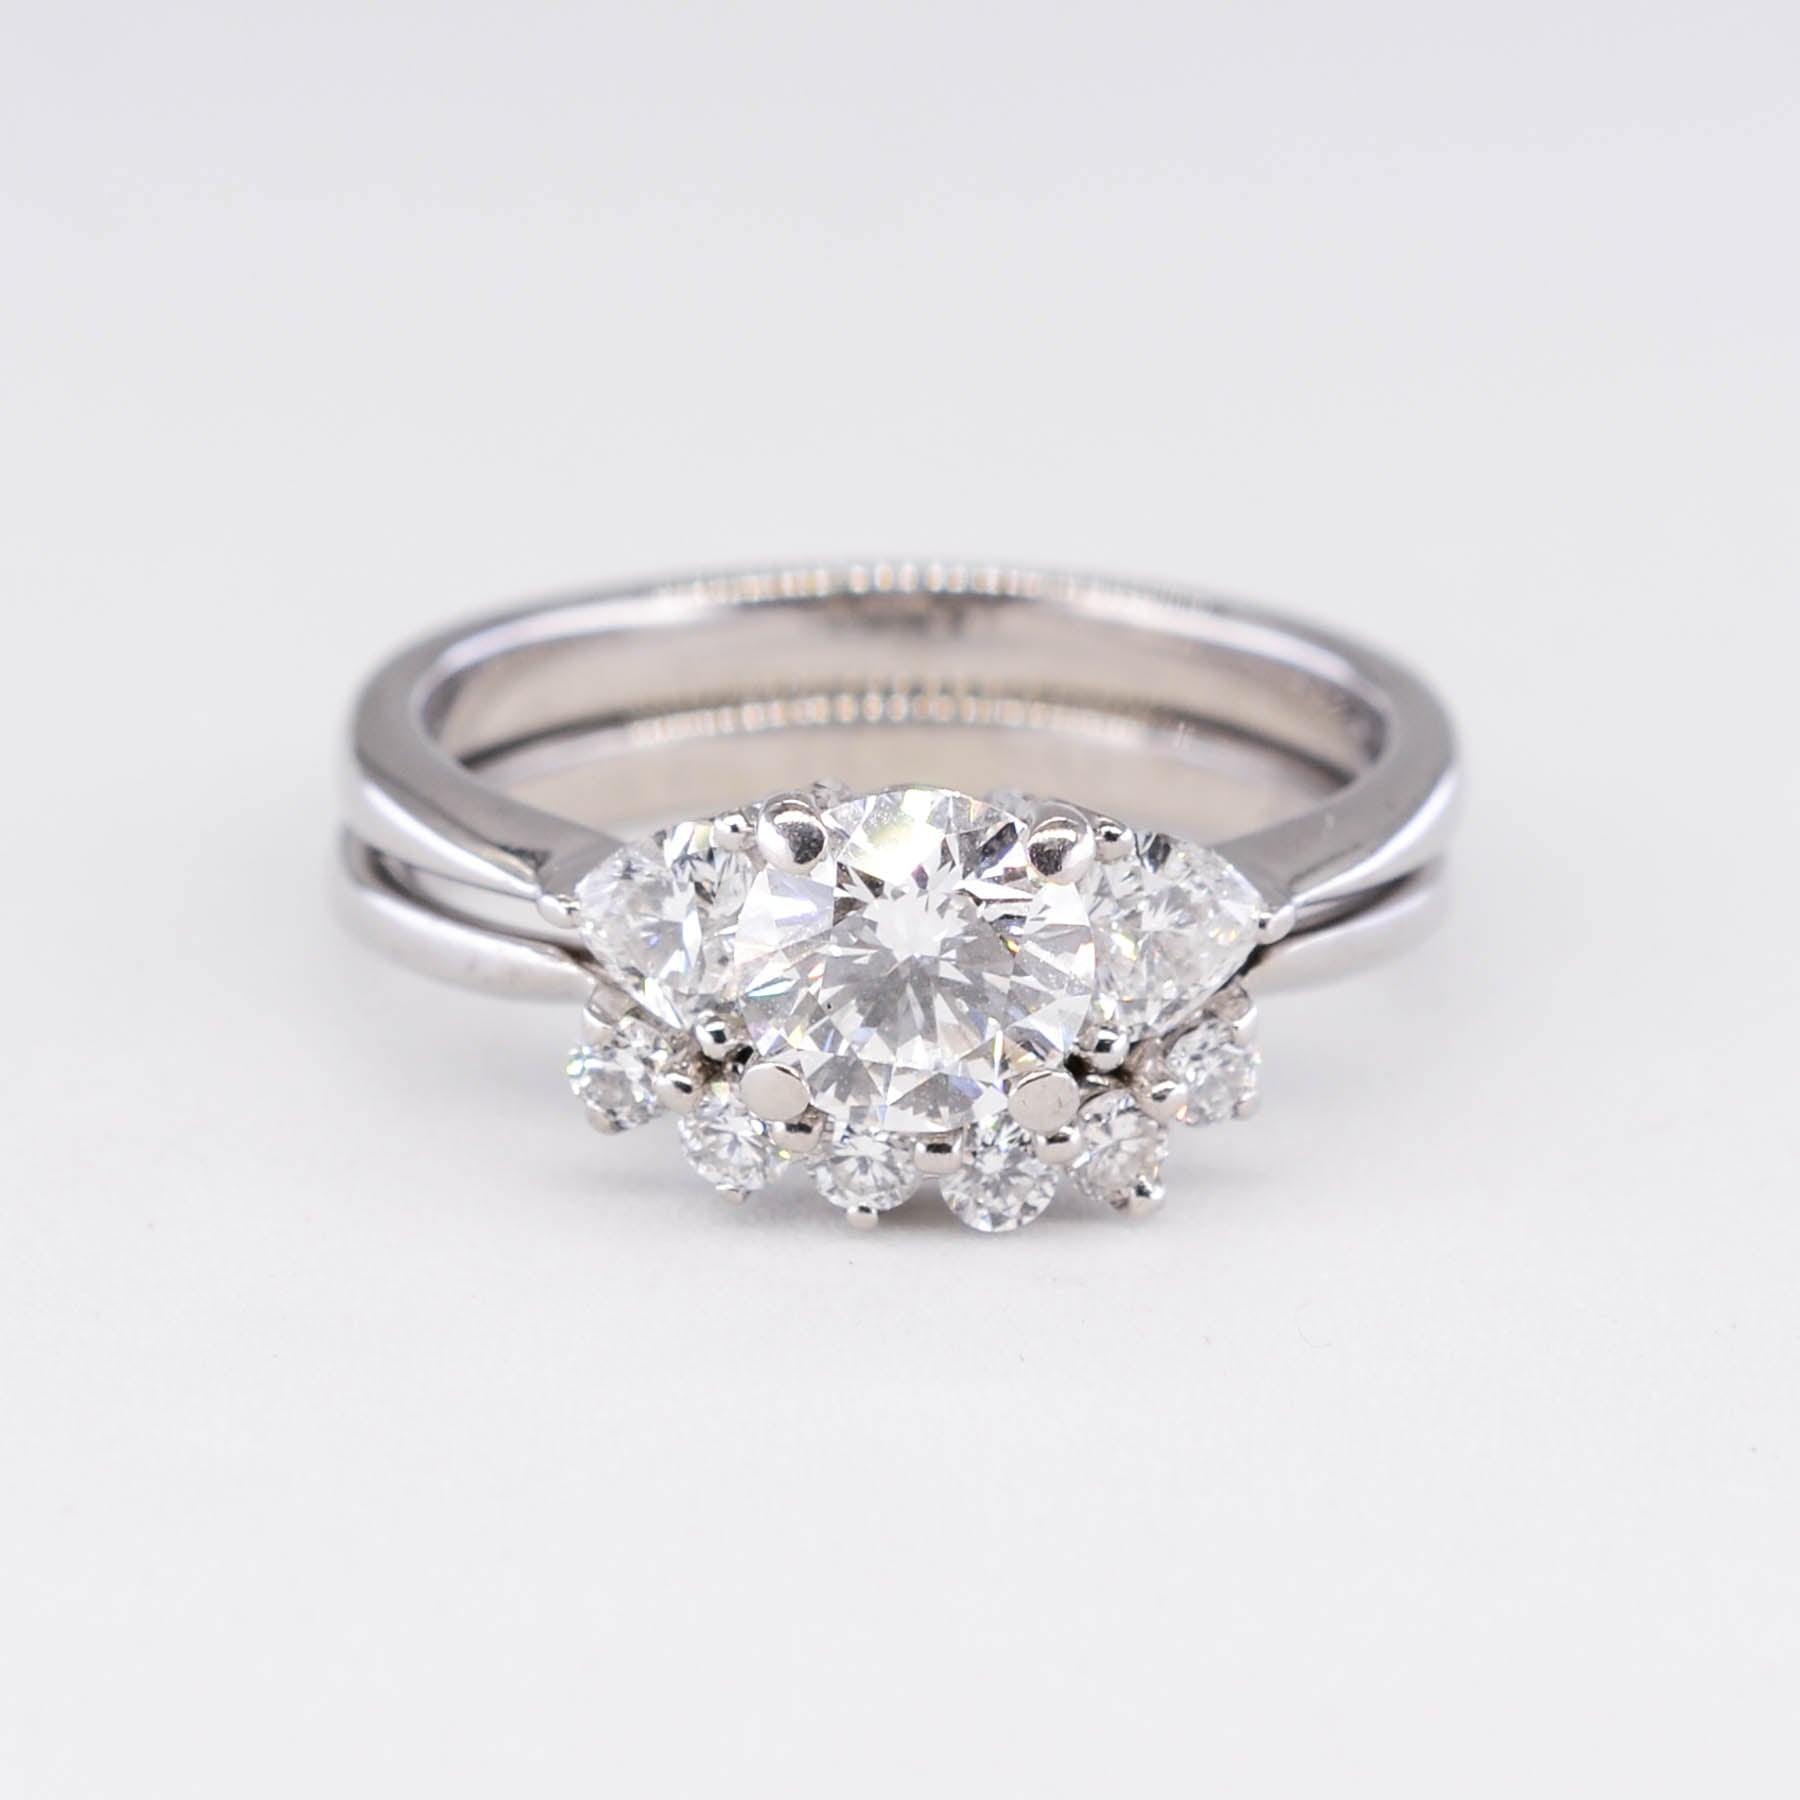 Three Stone Diamond Engagement Ring Set with Heart Diamonds | 1.37ctw | SZ 5.5 | AGS Certified